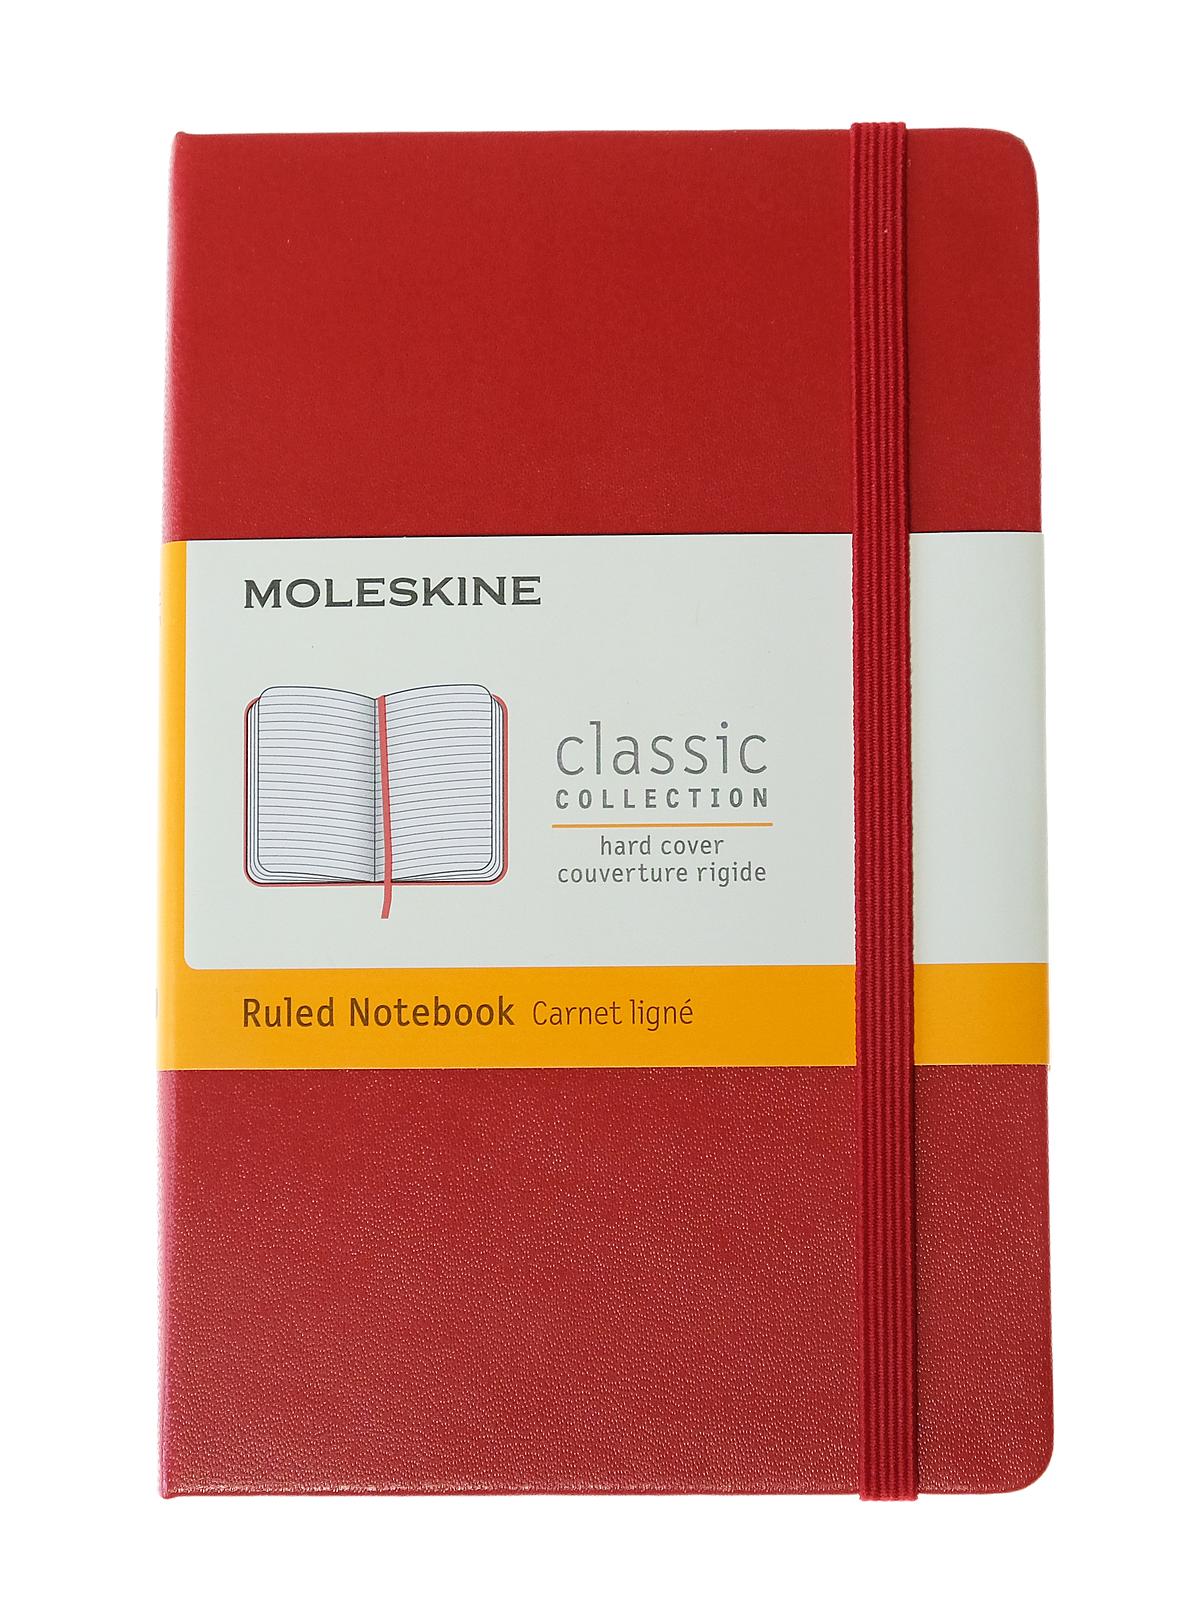 Classic Hard Cover Notebooks Red 3 1 2 In. X 5 1 2 In. 192 Pages, Lined